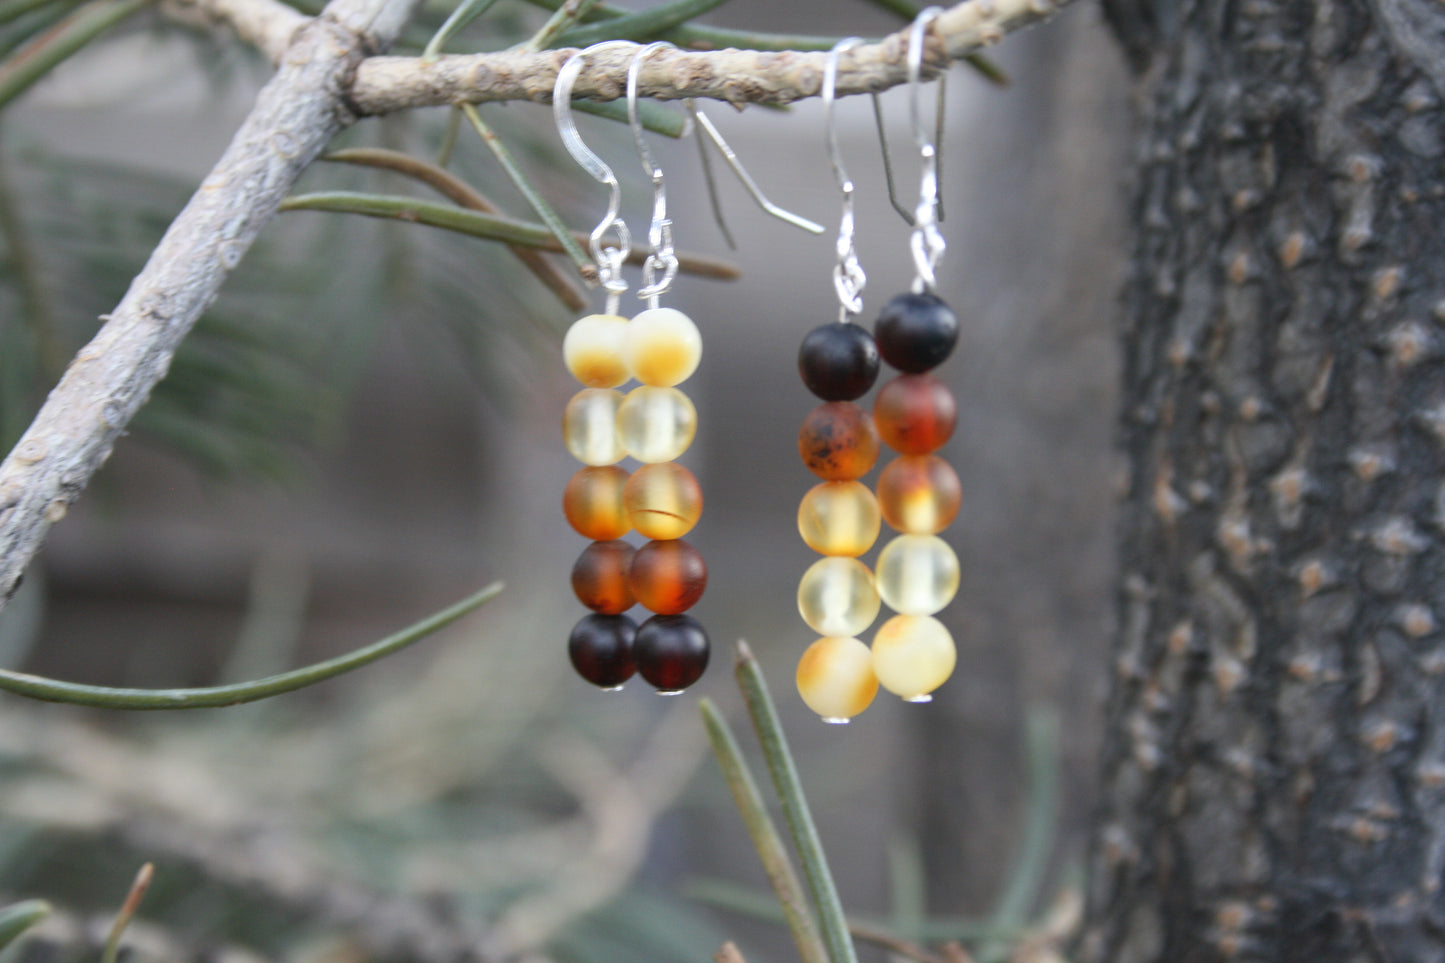 Sterling Silver Baltic Amber Earrings, Sunrise or Sunset Style